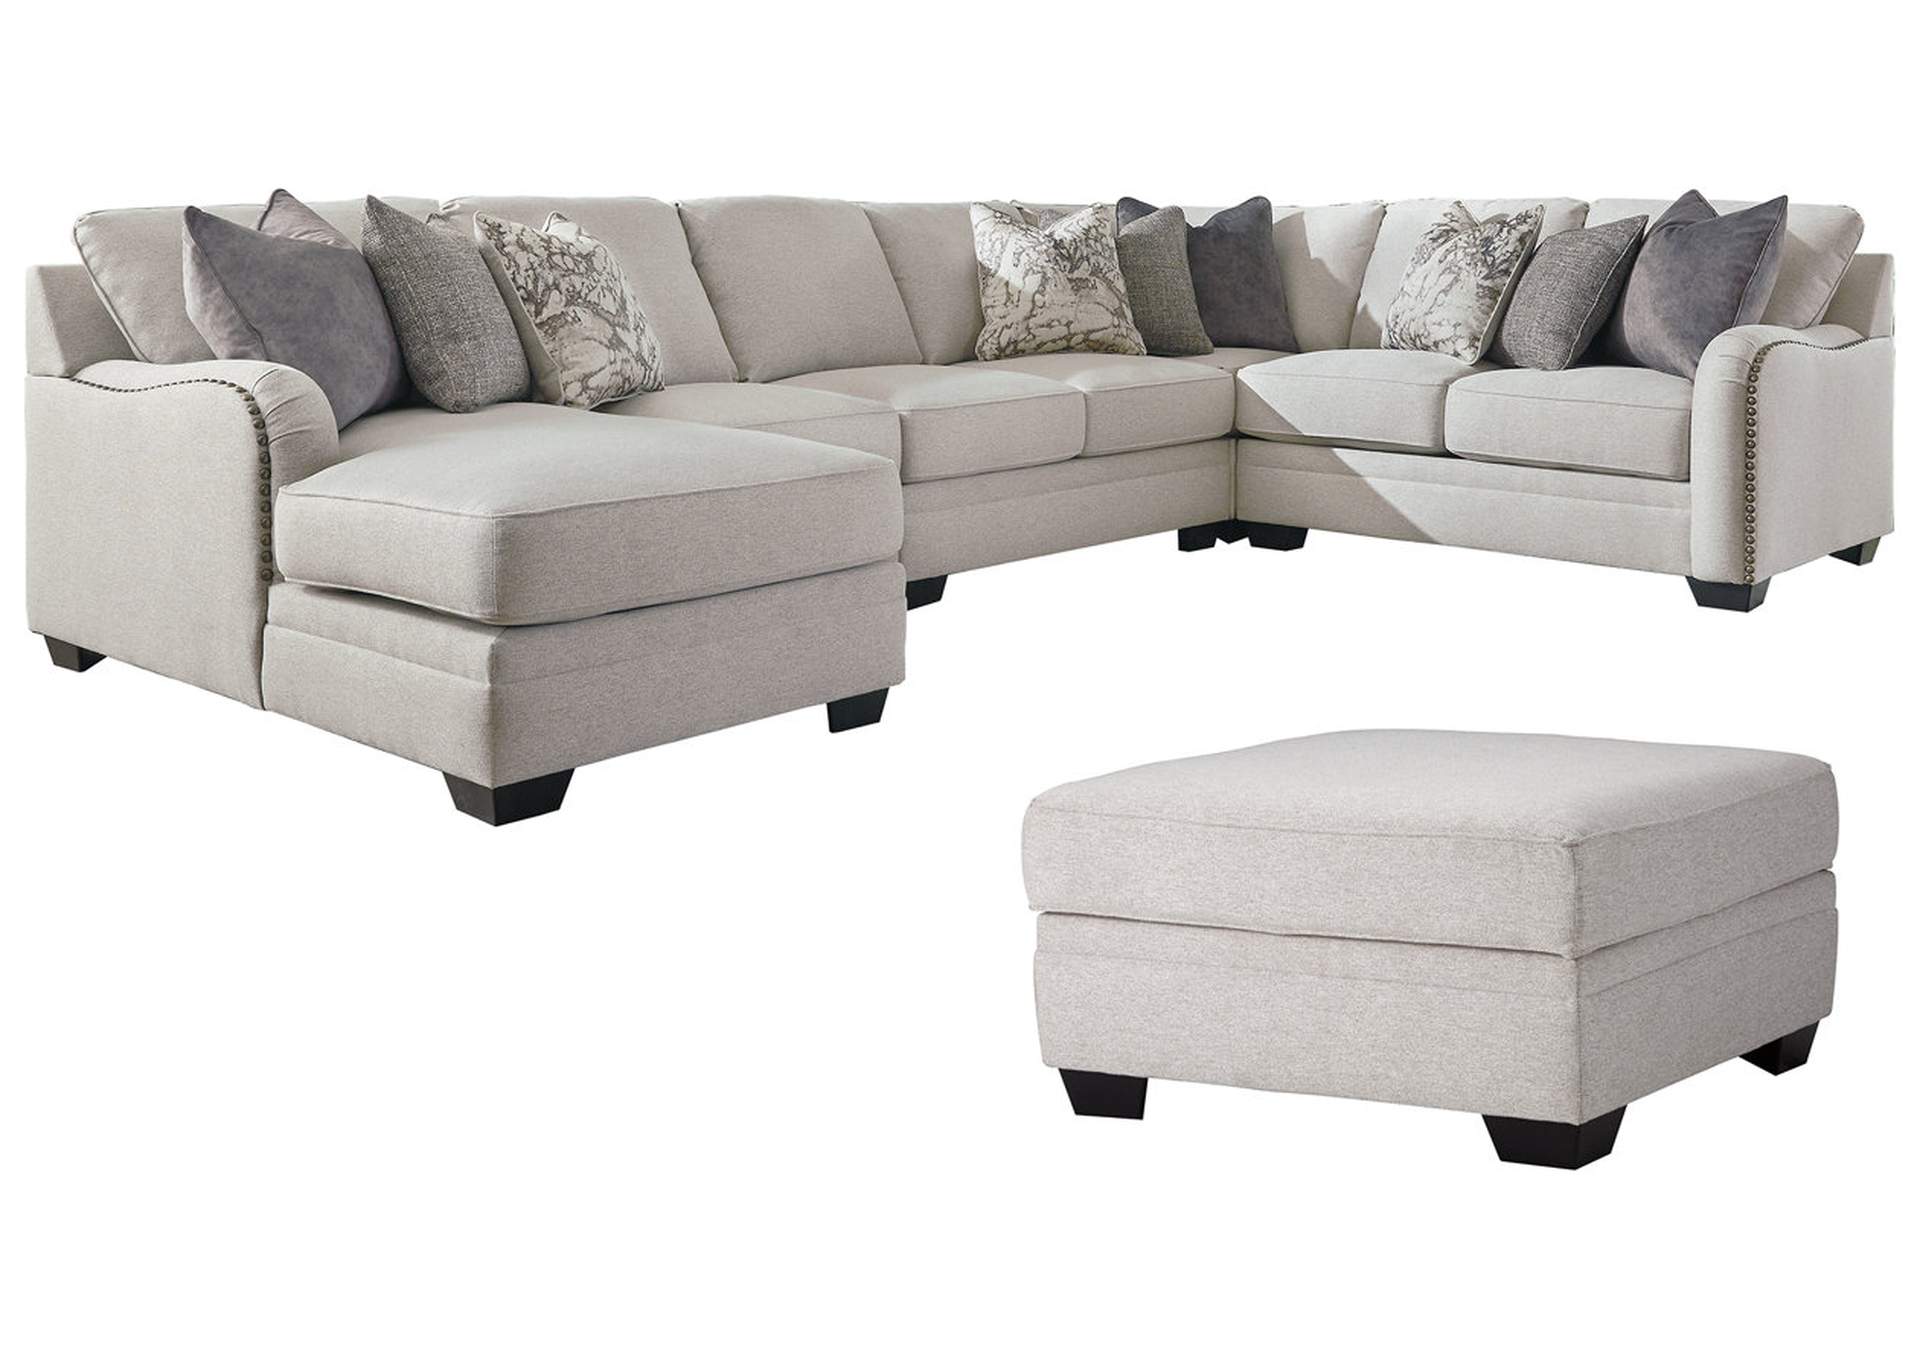 Dellara 5-Piece Sectional with Ottoman,Benchcraft